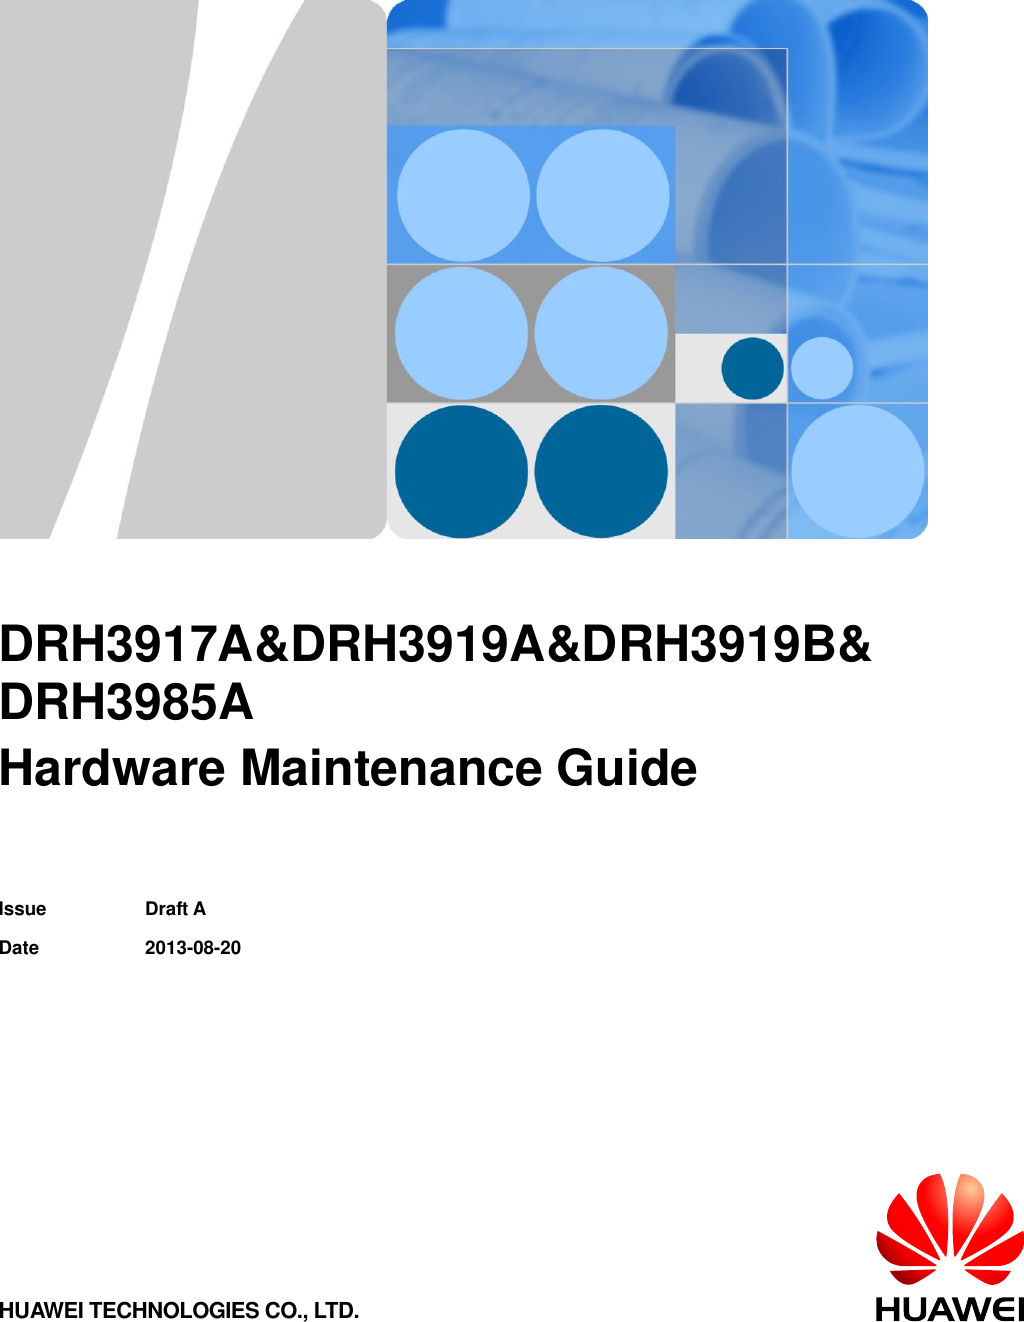           DRH3917A&amp;DRH3919A&amp;DRH3919B&amp; DRH3985A Hardware Maintenance Guide     Issue Draft A   Date 2013-08-20 HUAWEI TECHNOLOGIES CO., LTD. 